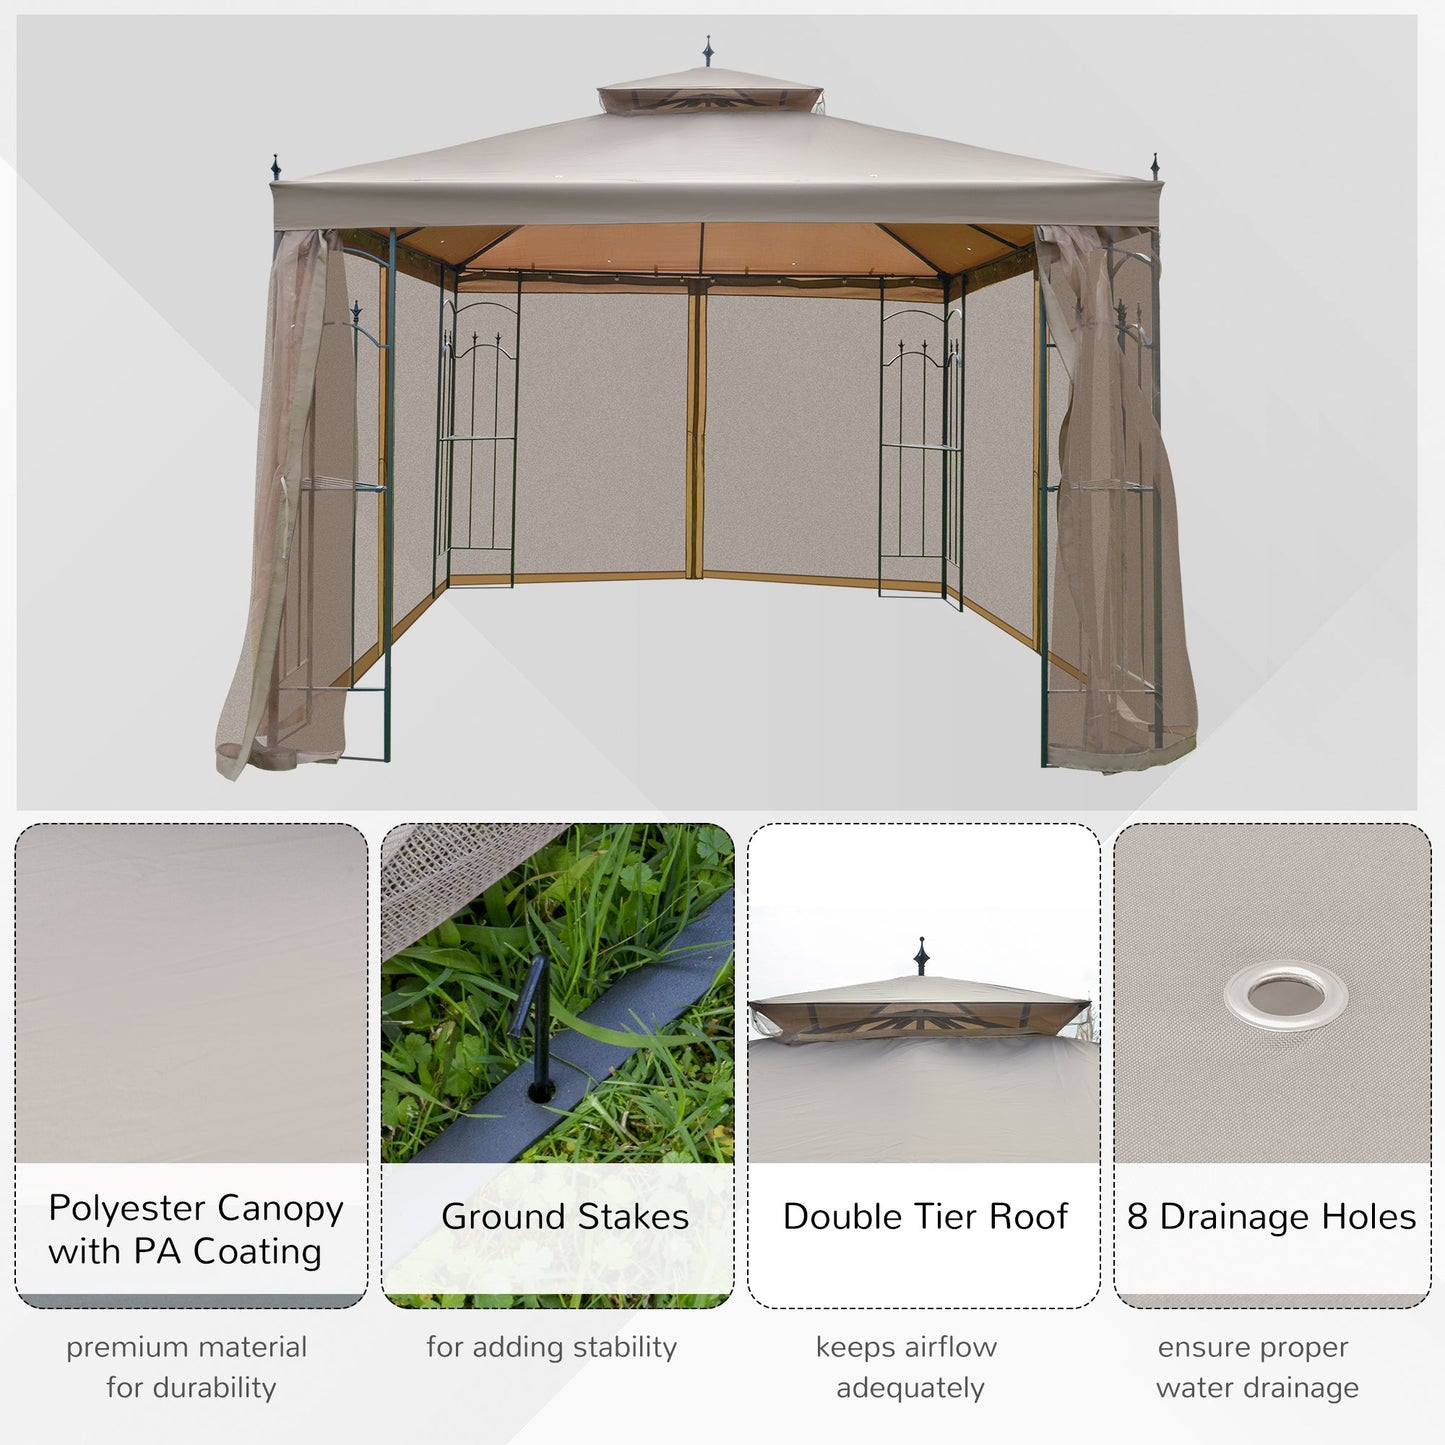 Outdoor and Garden-10' x 10' Steel Outdoor Patio Gazebo Canopy with Removable Mesh Curtains, Display Shelves, & Steel Frame, Brown - Outdoor Style Company